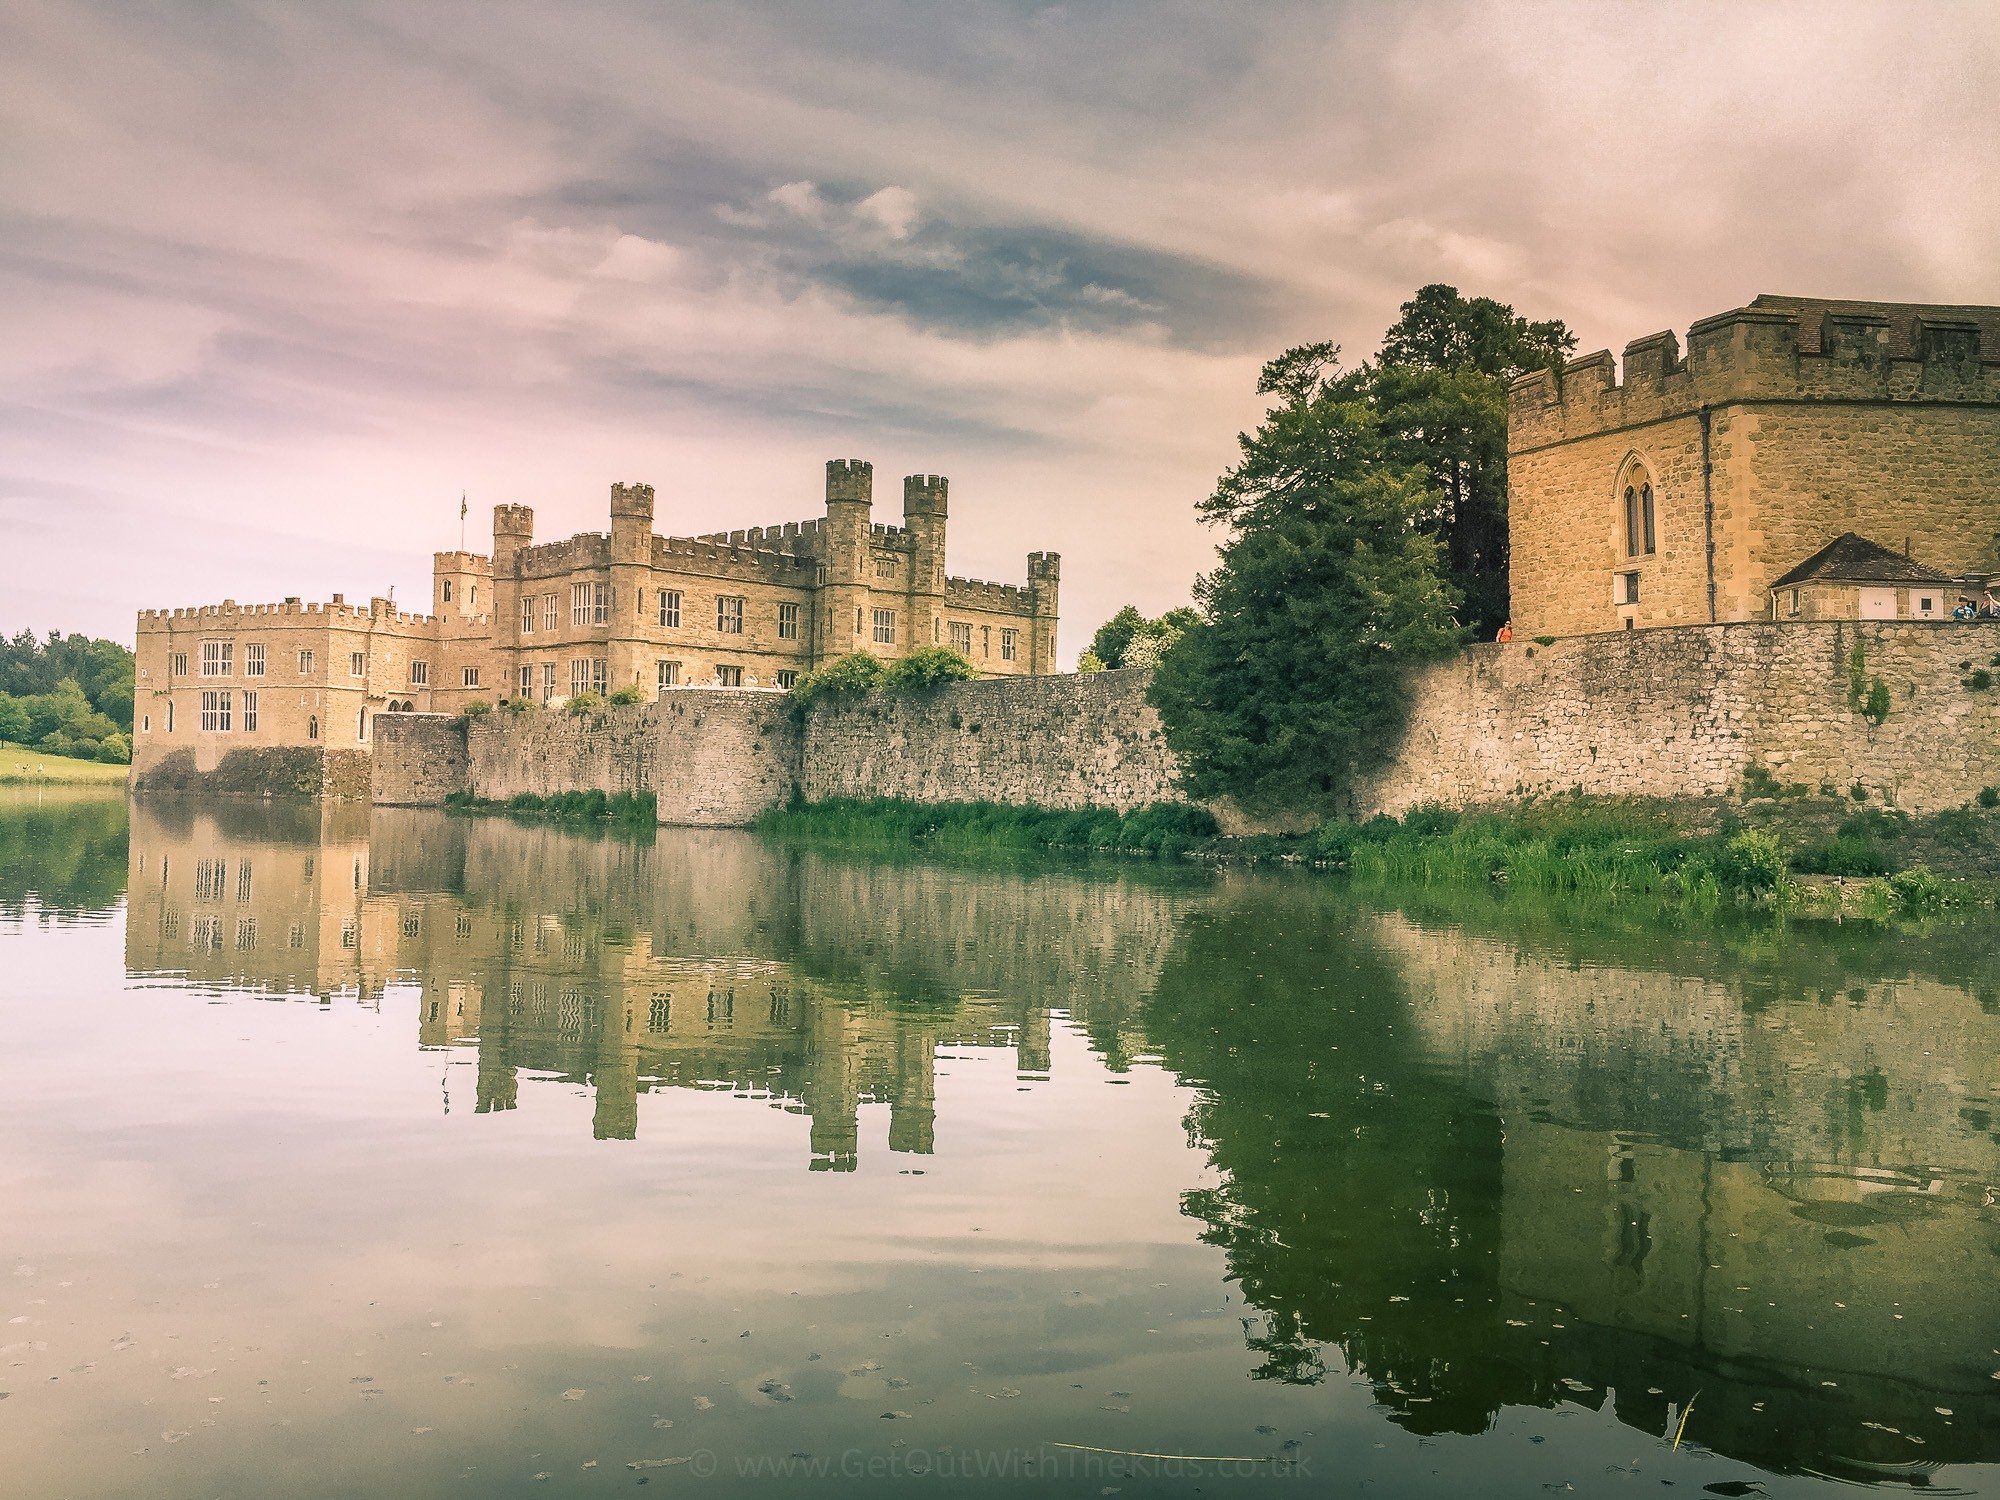 More of Leeds Castle reflecting in the moat.